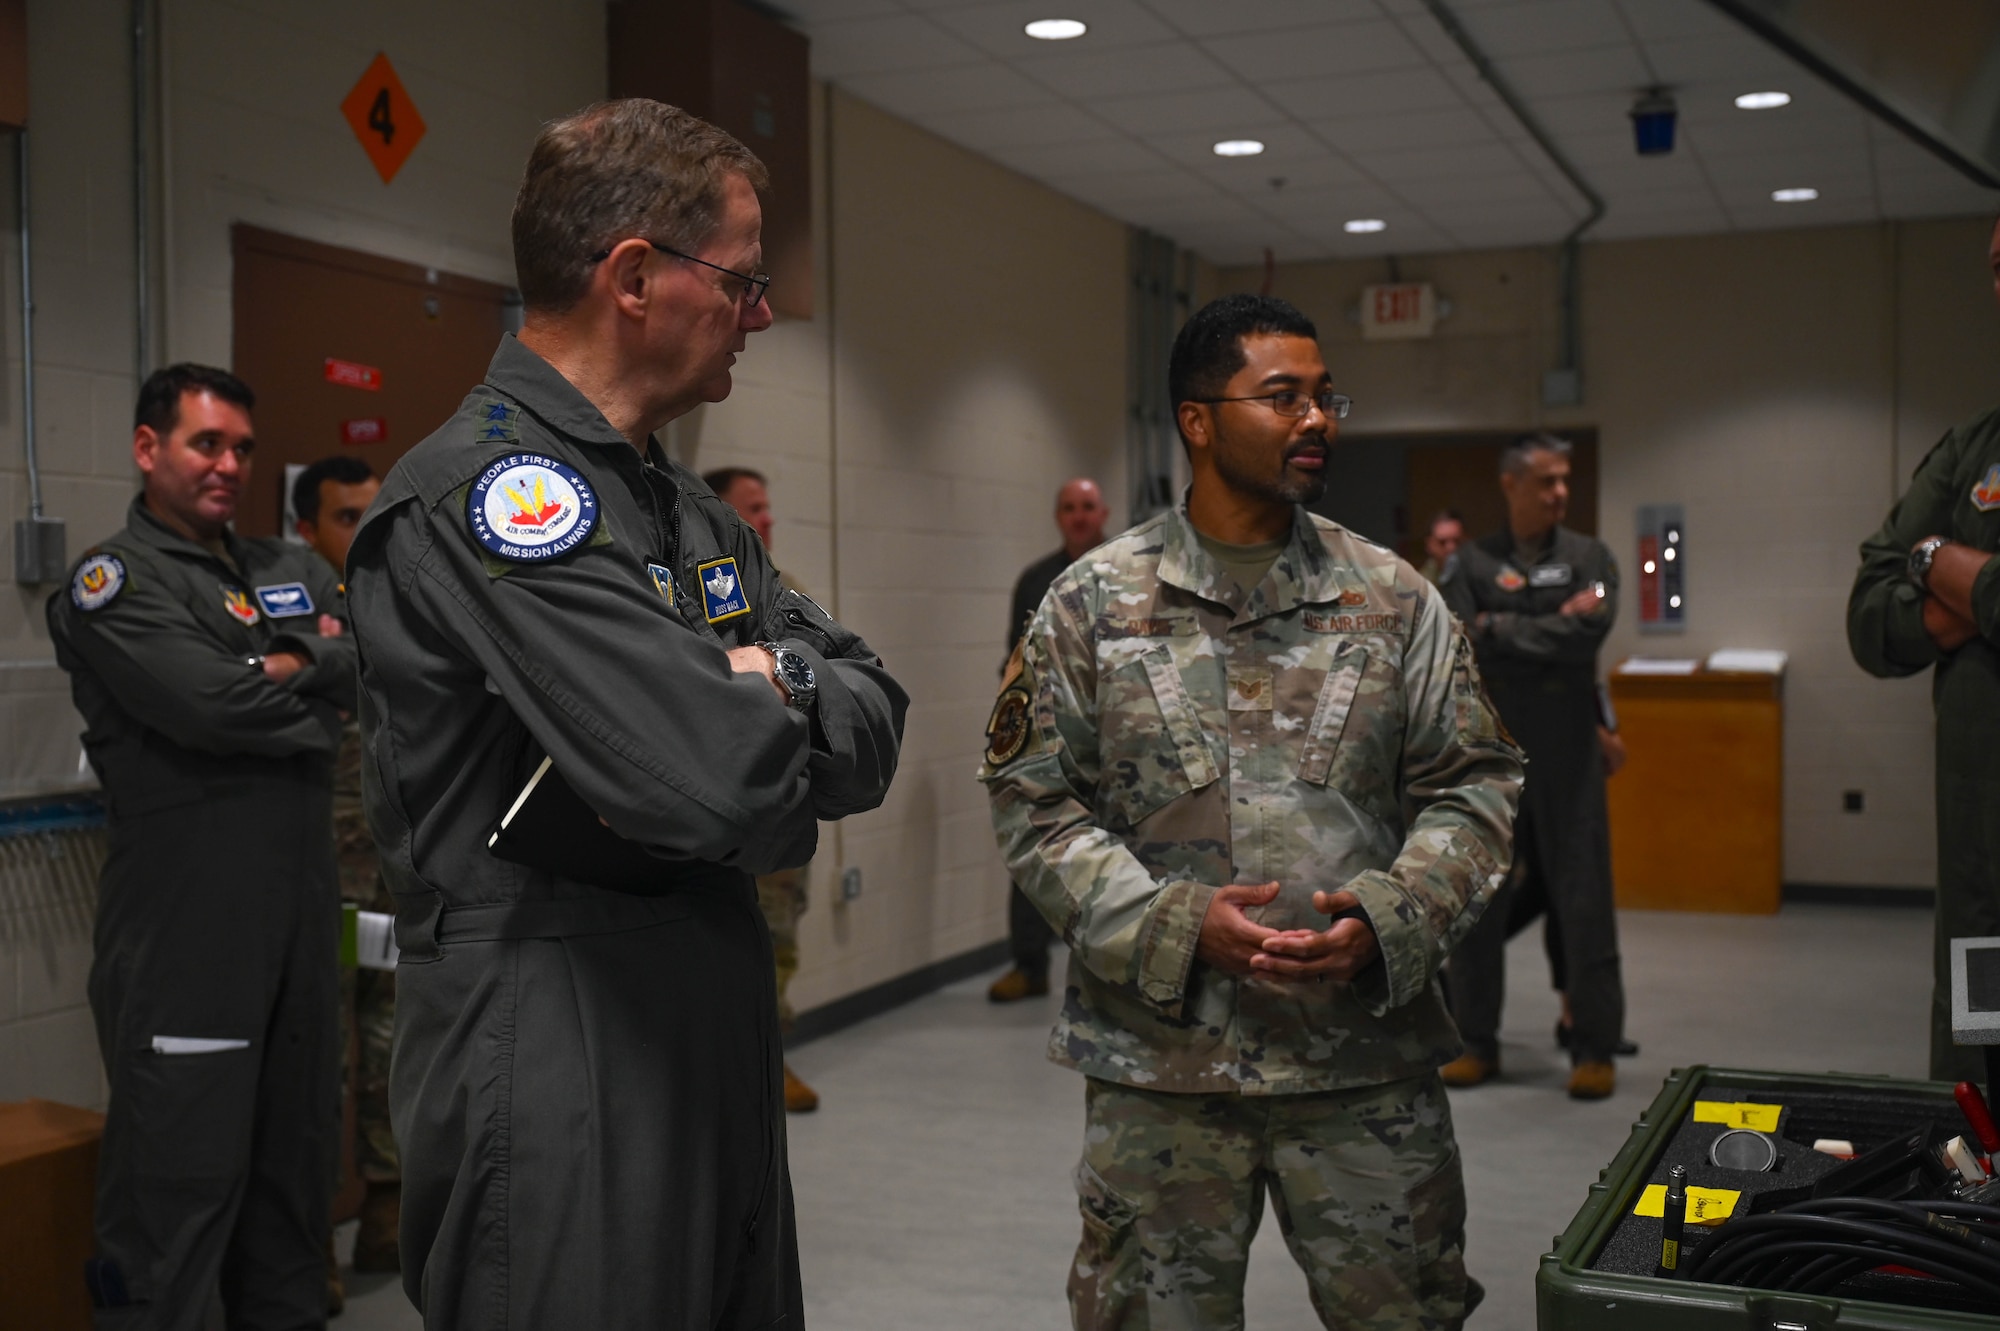 U.S. Air Force Lt. Gen. Russ Mack, deputy commander of Air Combat Command, receives a brief from Tech. Sgt. Reginald Davis, 87th Electronic Warfare Squadron COMBAT SHIELD avionics electronic warfare (EW) journeyman, on the mission of COMBAT SHIELD during a visit to the 350th Spectrum Warfare Wing at Eglin Air Force Base, Fla., Sept. 6, 2023. COMBAT SHIELD is the lead U.S. Air Force EW assessment program and is responsible for advising all MAJCOM-specific EW assessment programs. (U.S. Air Force photo by Capt. Benjamin Aronson)